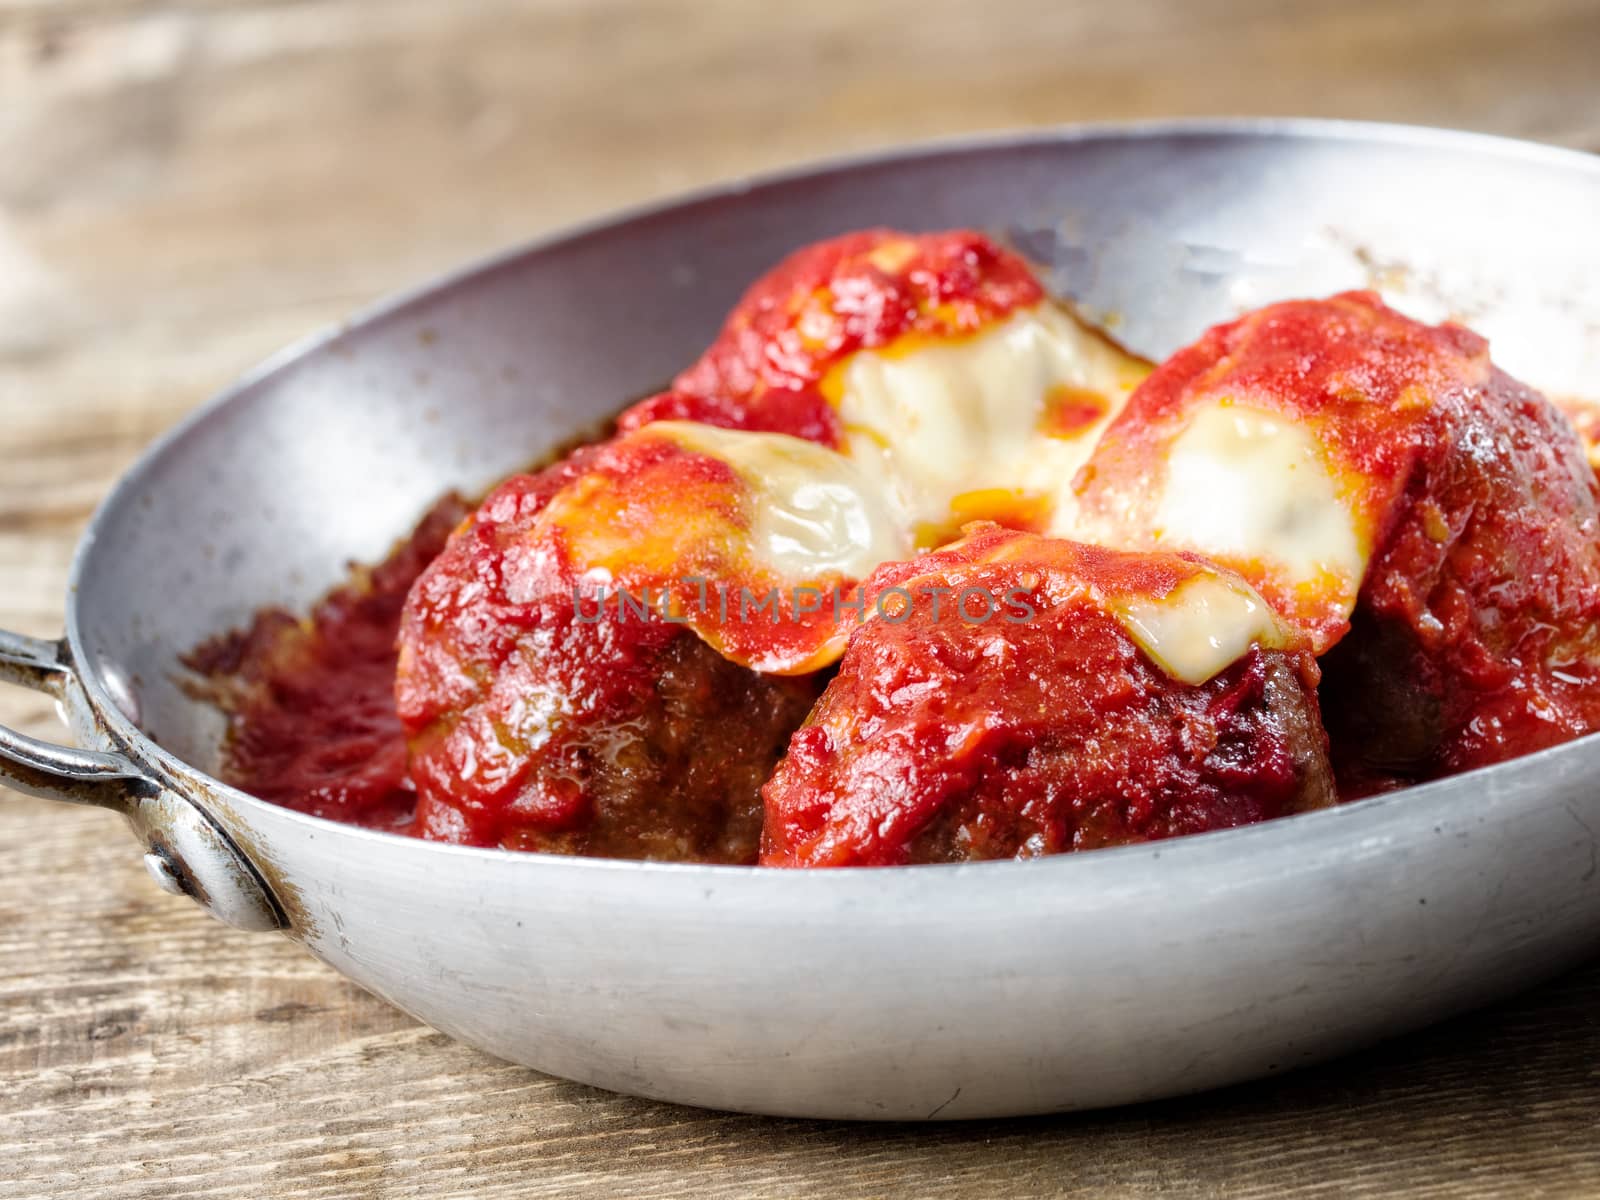 traditional classic italian meatball in tomato sauce by zkruger